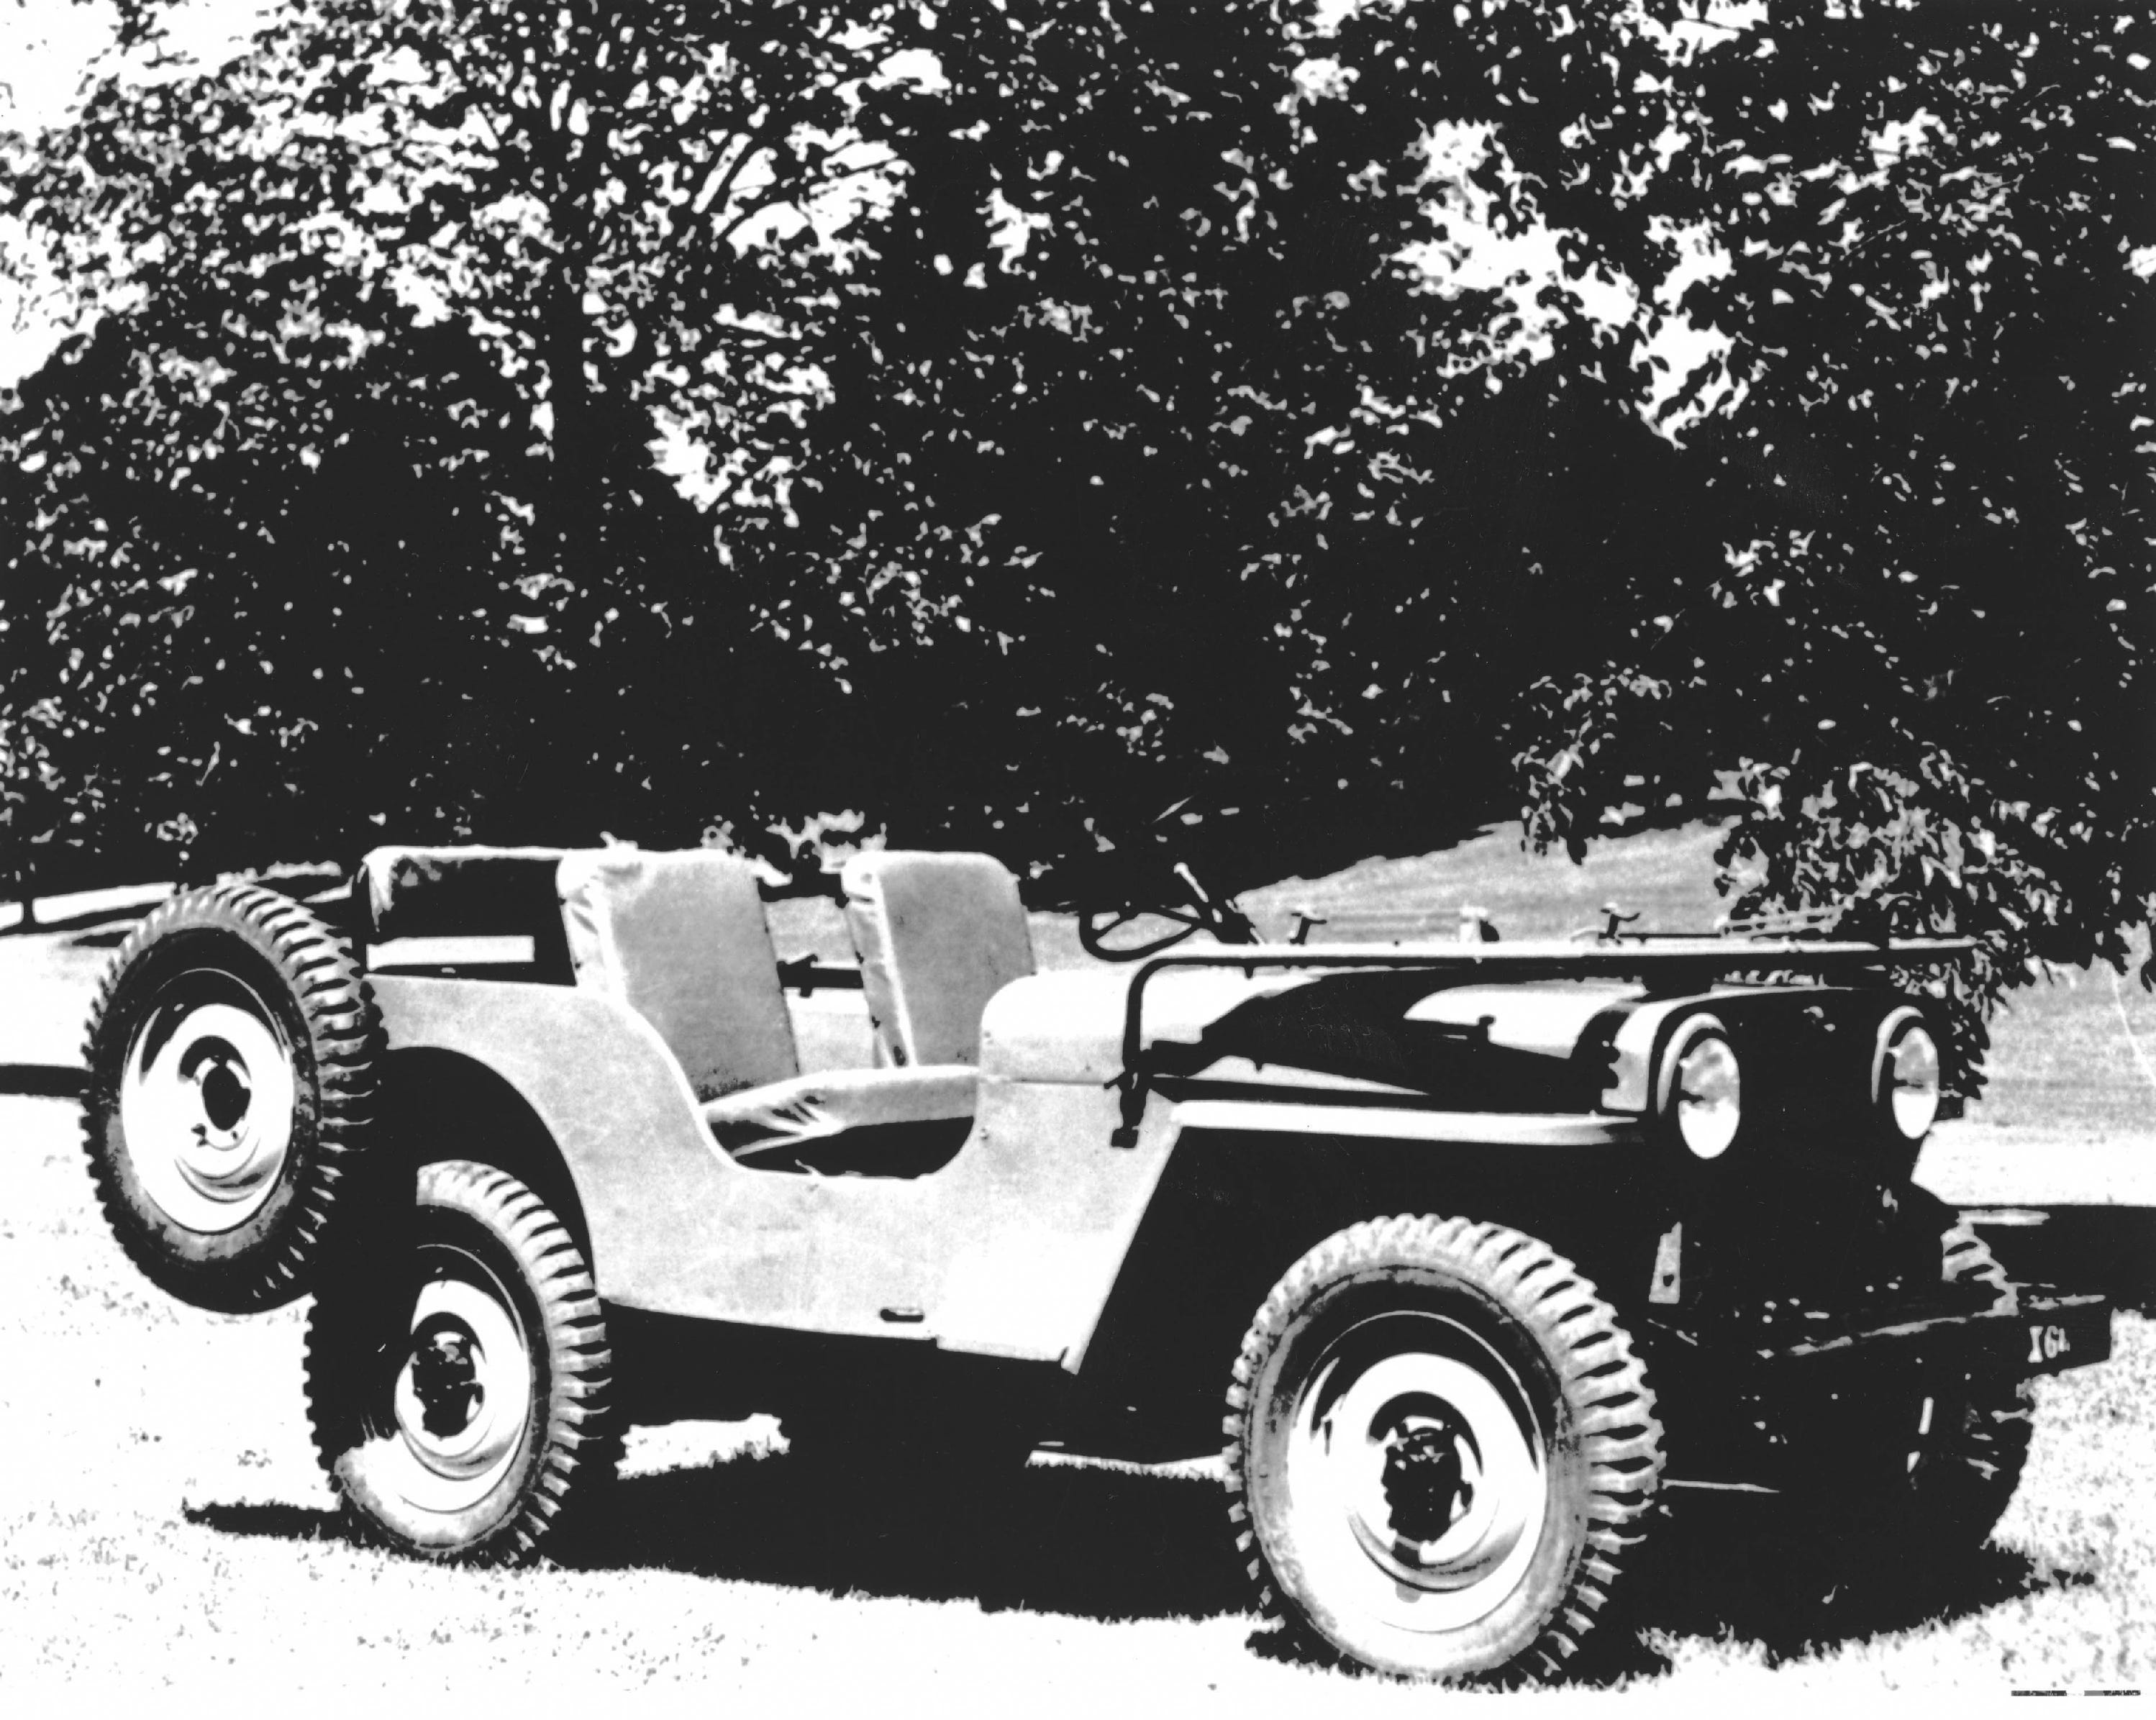 1945-1949 Jeep CJ-2A: The first civilian Jeep vehicle, the CJ-2A, was produced in 1945. It came with a tailgate, side-mounted spare tire, larger headlights, an external fuel cap and many more items that its military predecessors did not include. Several CJ-2A features Ð such as a 134-cubic-inch I-4 engine, a T-90A transmission, Spicer 18 transfer case and a full-floating Dana 25 front and Dana 23-2 rear axle Ð were found on numerous Jeep vehicles in future years. The CJ-2A was produced for four years.